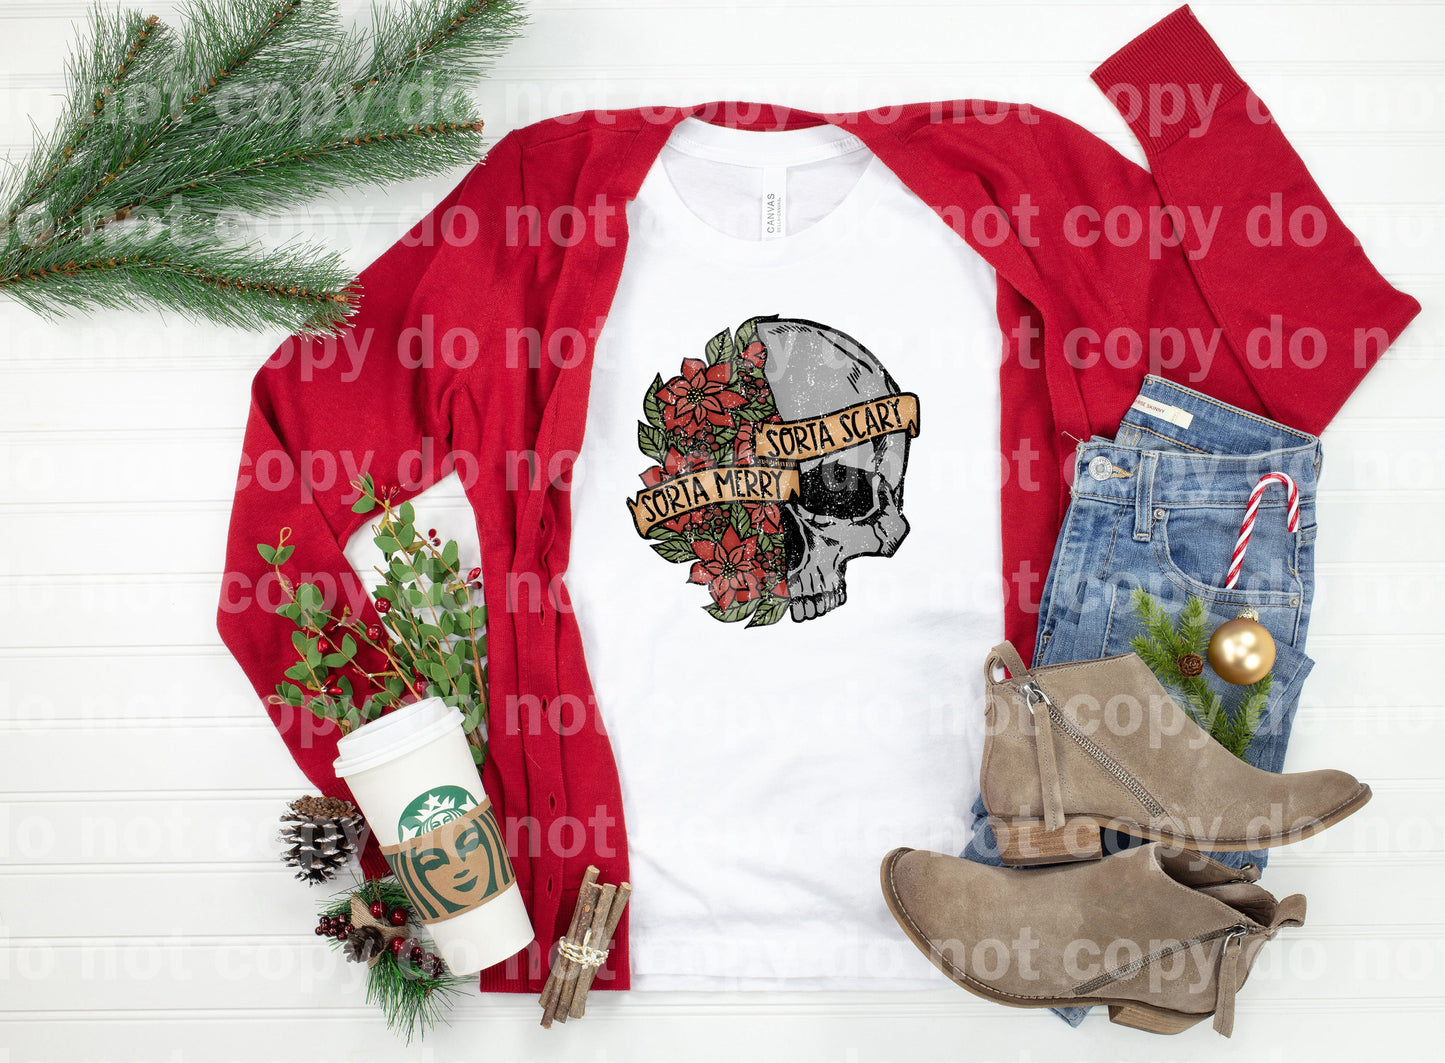 Sorta Merry Sorta Scary Distressed Full Color/One Color Dream Print or Sublimation Print